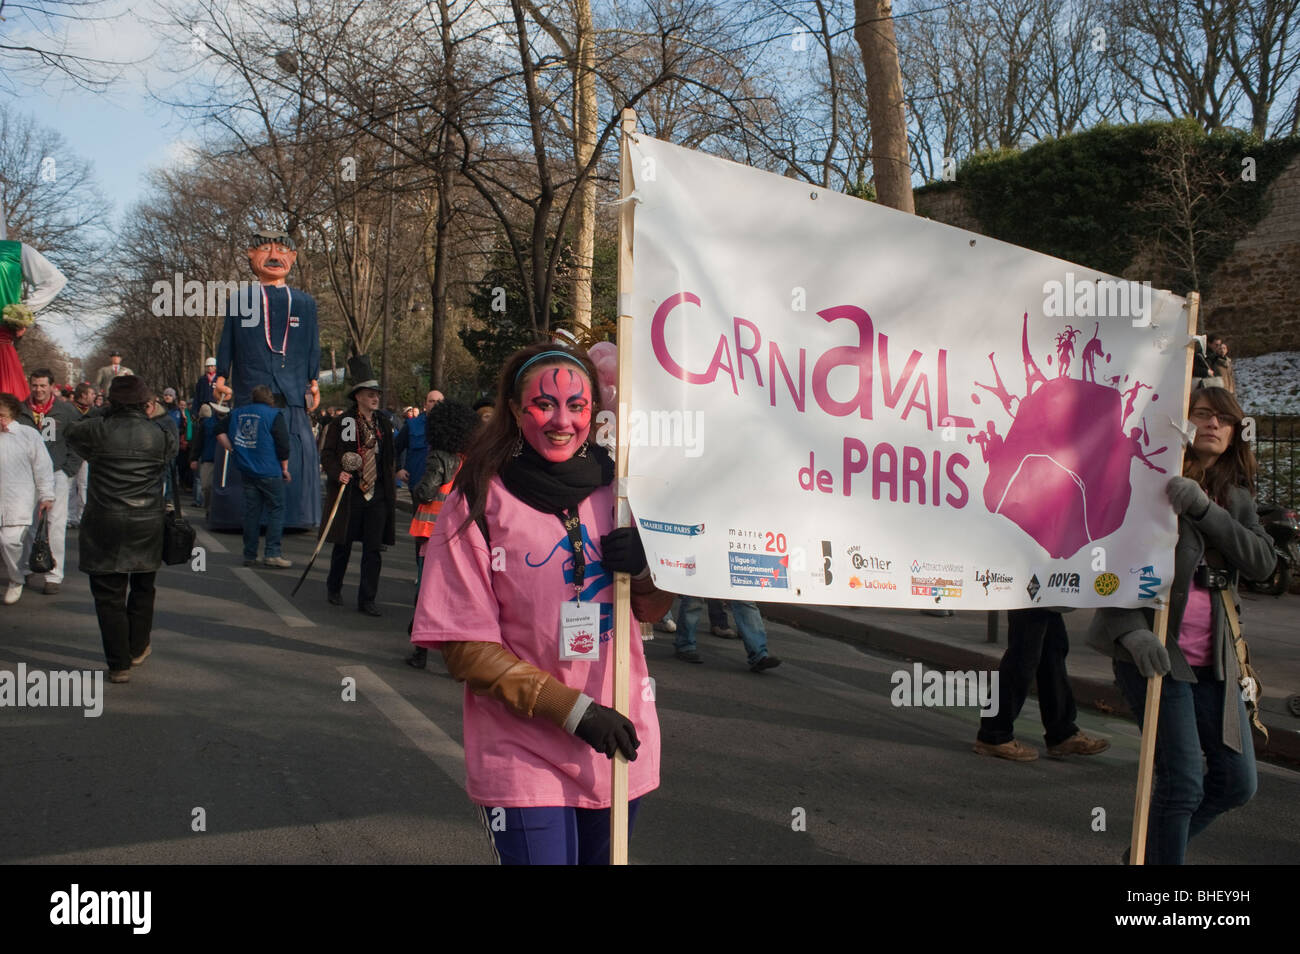 Paris, France, People in Costume Marching in 'Carnaval de Paris' Paris Carnival Street Festival, Women Holding Sign, Customs and traditions France Stock Photo